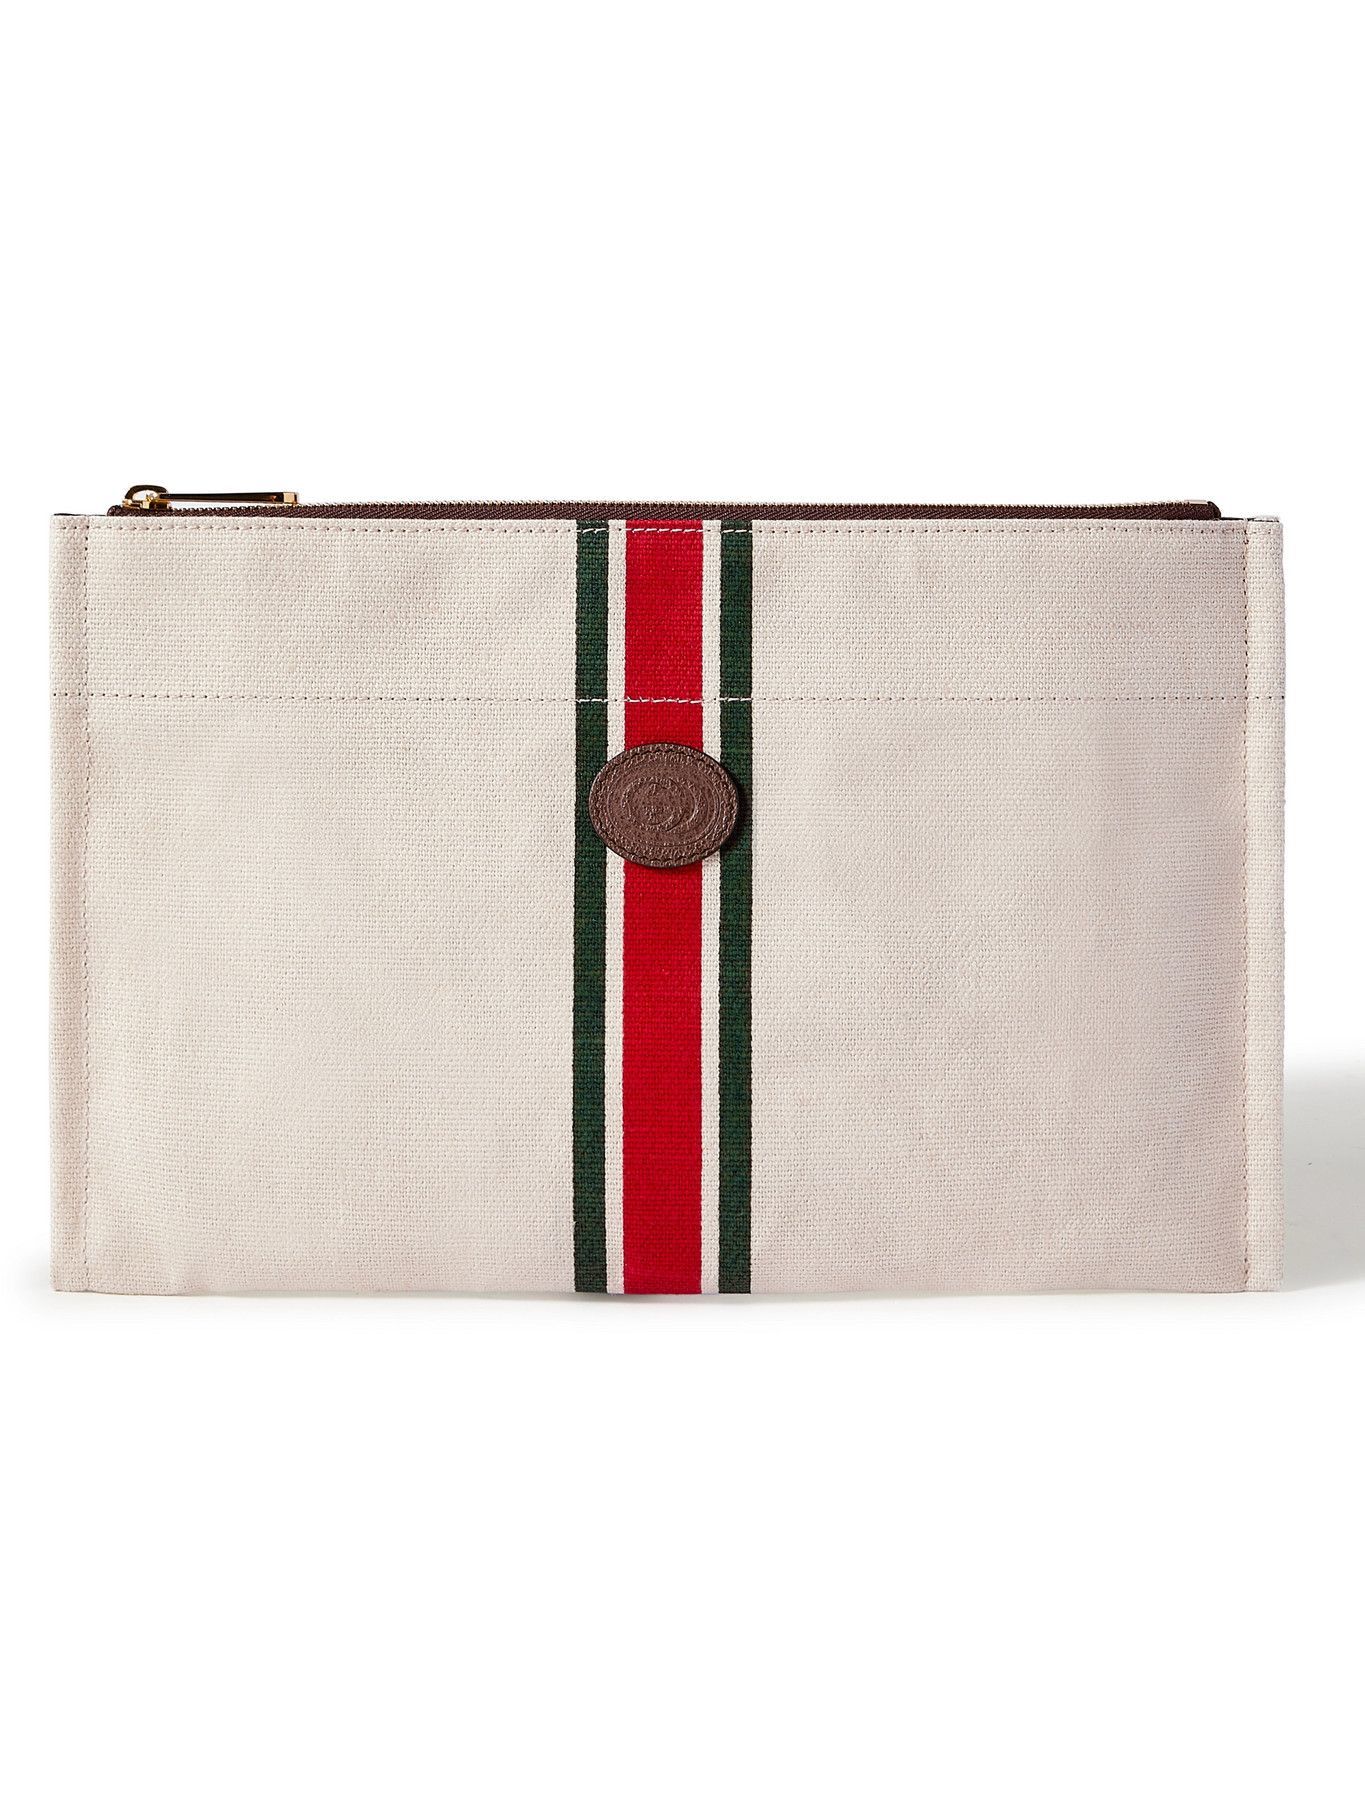 GUCCI - Leather-Trimmed Striped Canvas Pouch Gucci